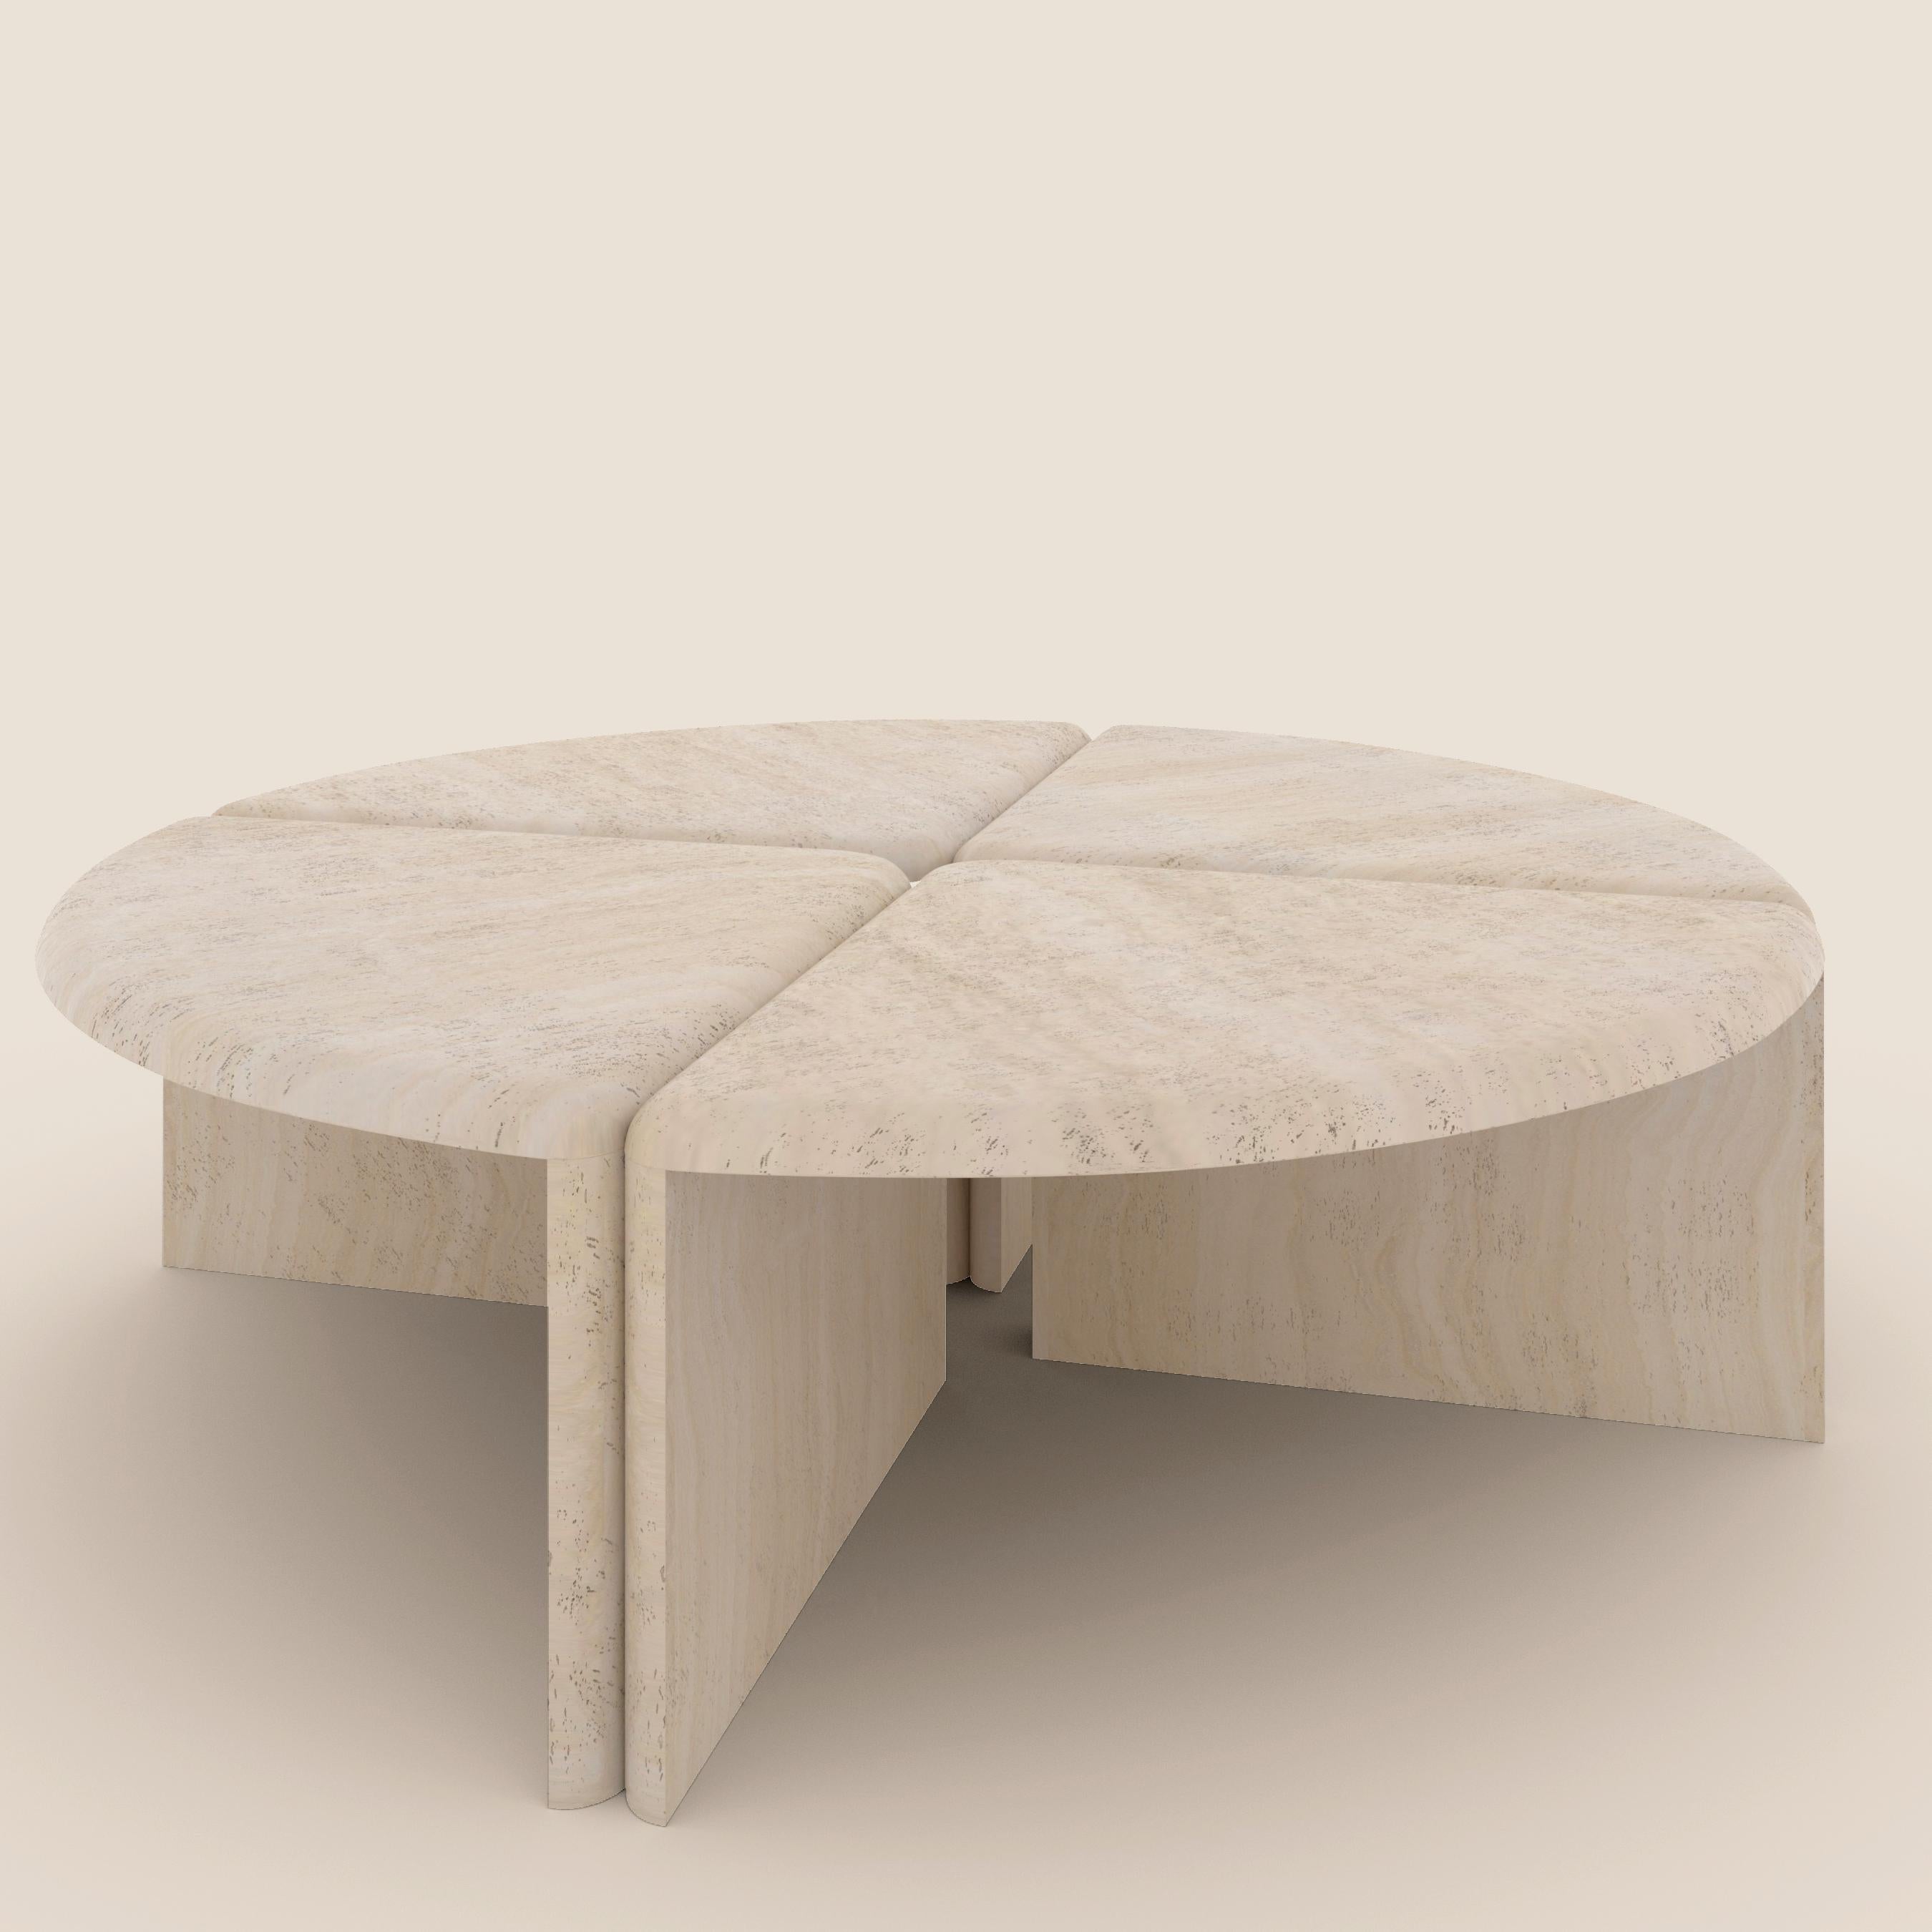 A coffee table handmade out of 30 mm thick honed unfilled Navona Travertine. Inspired by lily pads and their curled edges, it's divided in 4 quarters, with each part's rounded edges juxtaposed to the adjacent parts' edges. Available in any size and